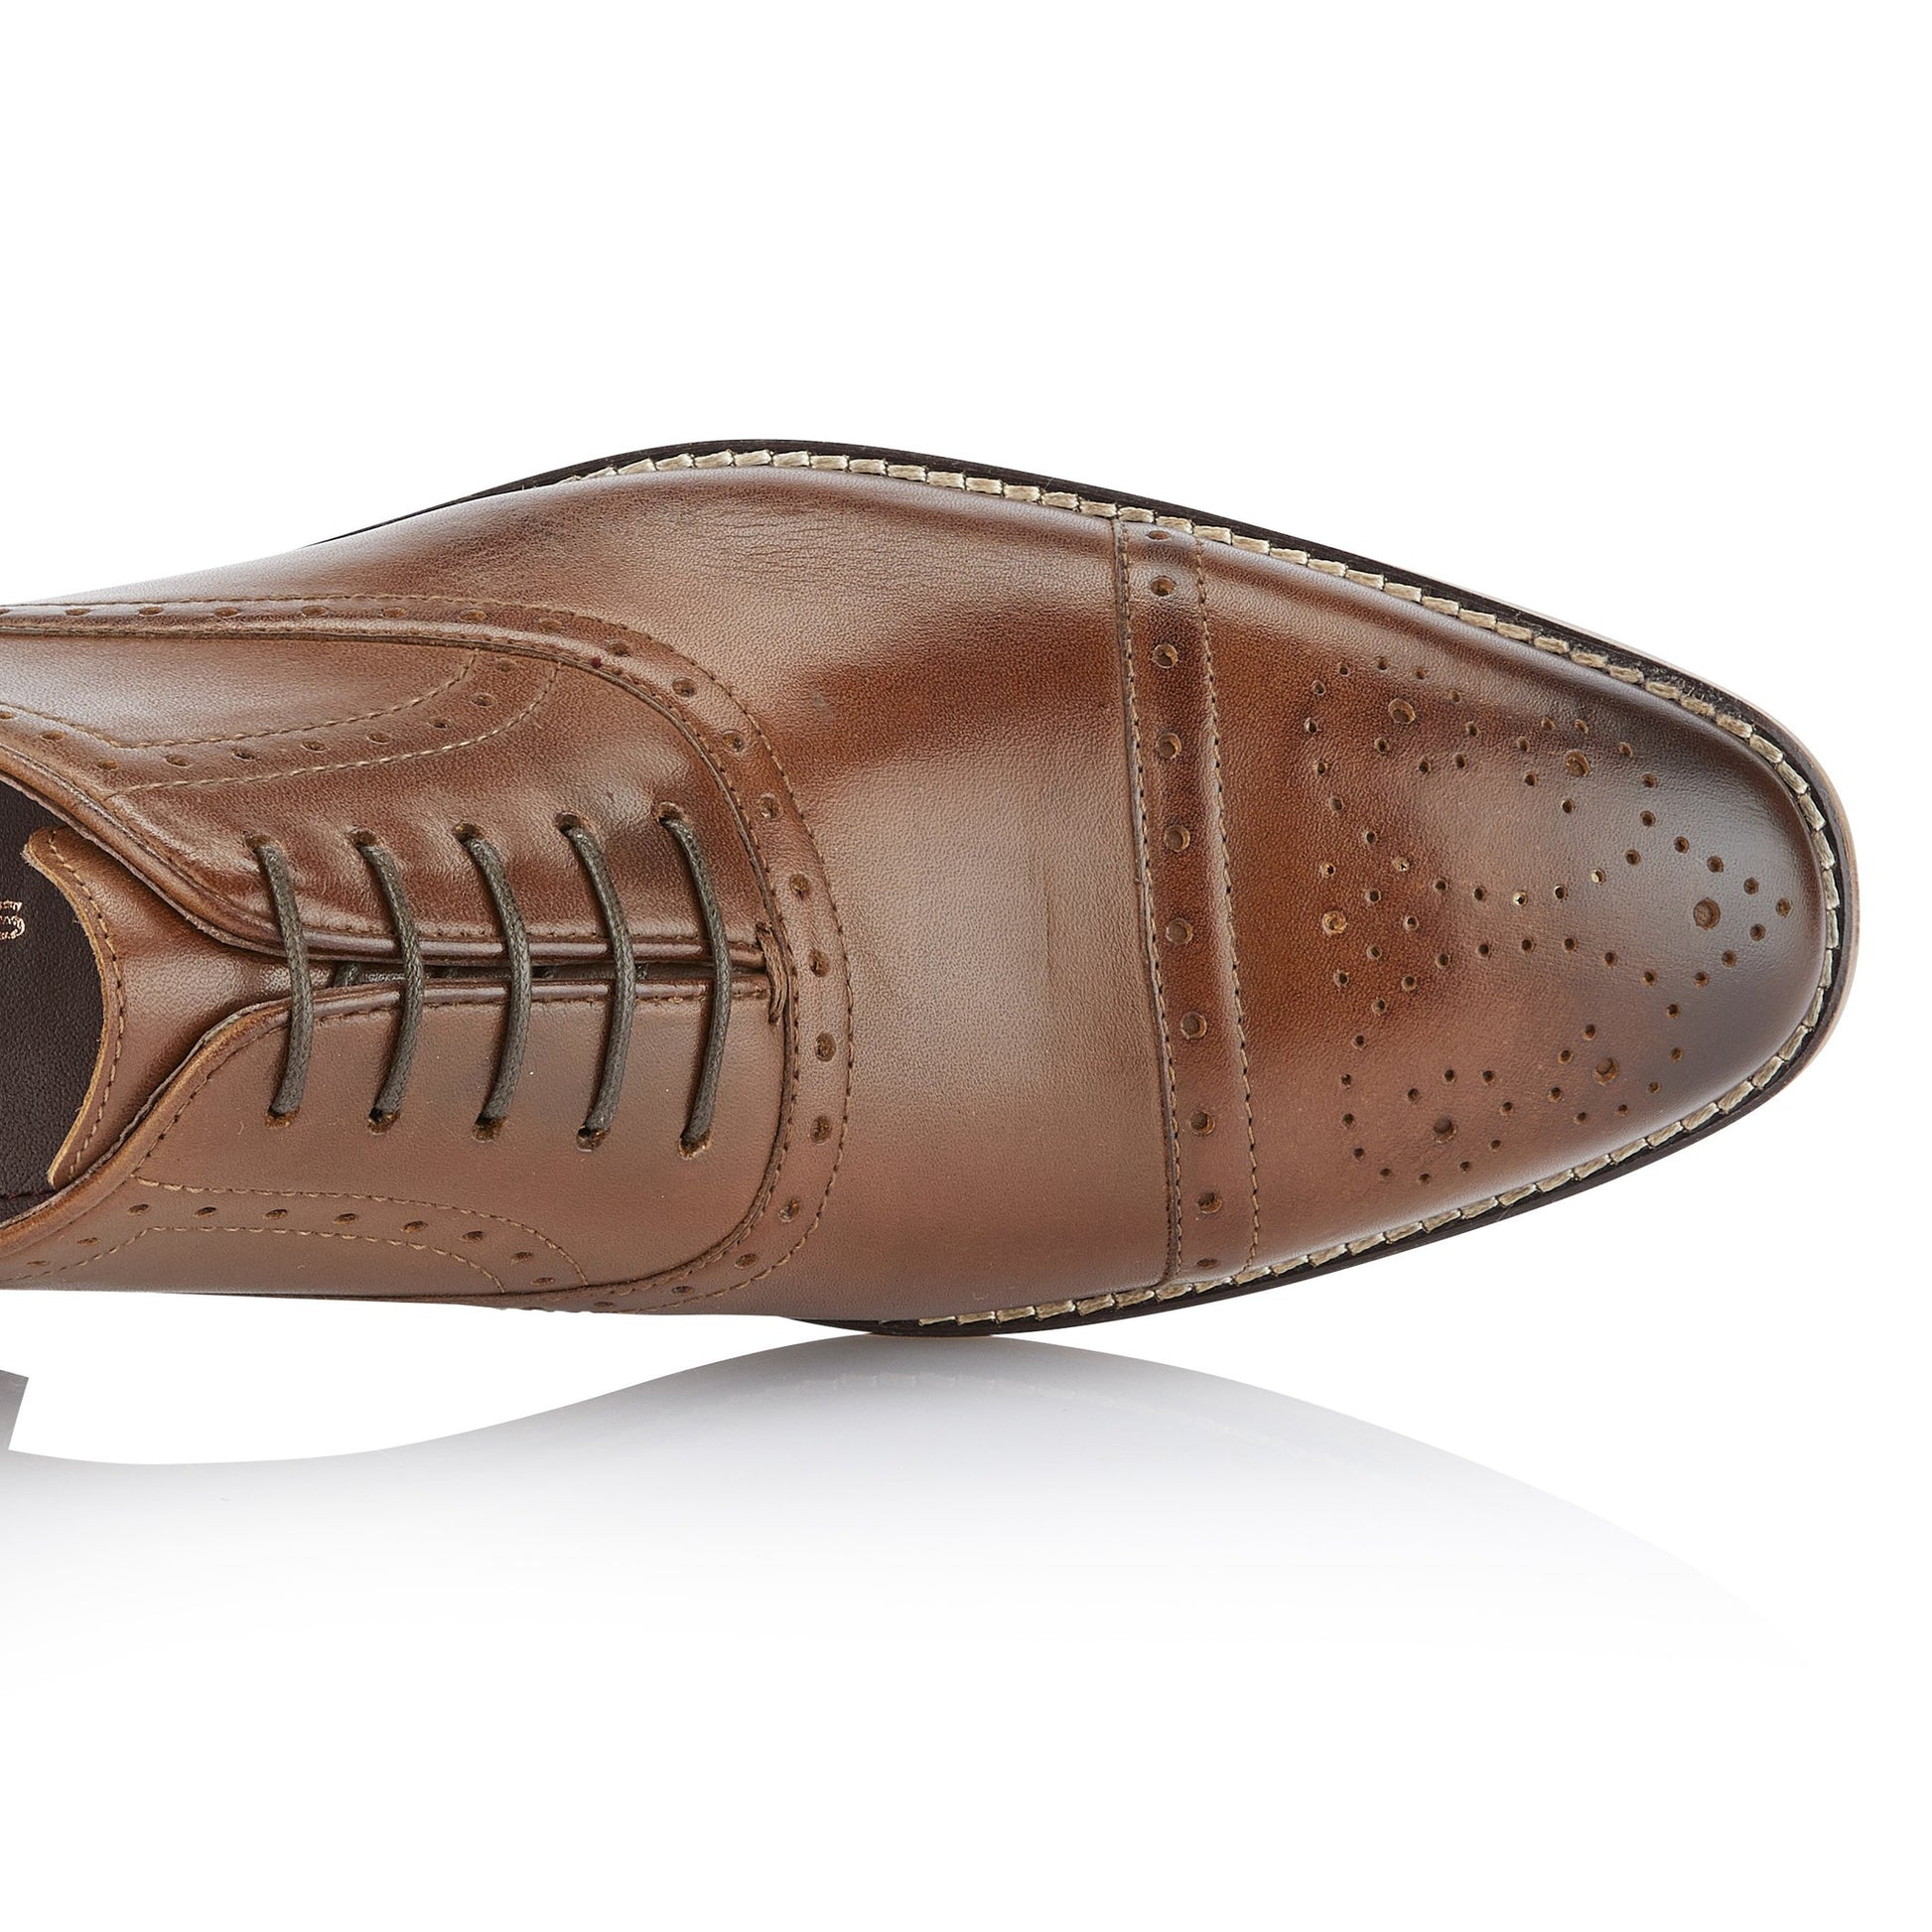 Mens Arthur Oxford Shoes In Chestnut With Brogue Detail